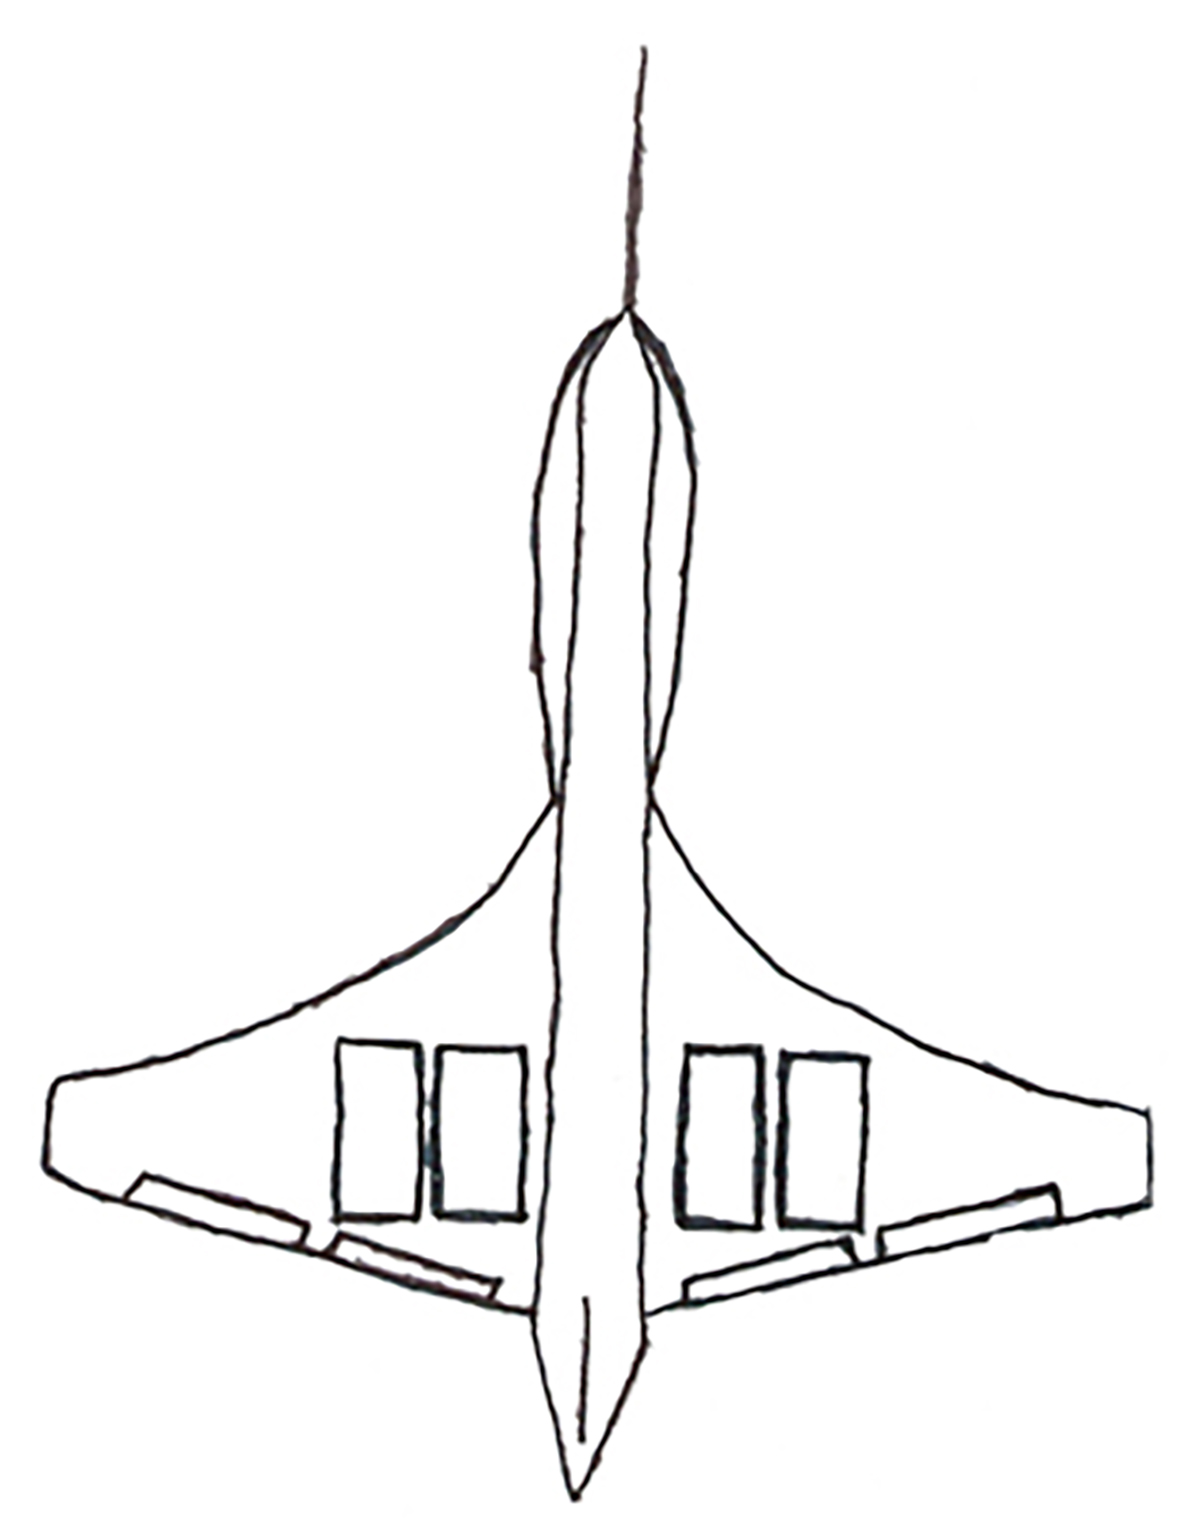 Drawing of the Aurelia aircraft (which came in 3rd place, a tie) in 2008.